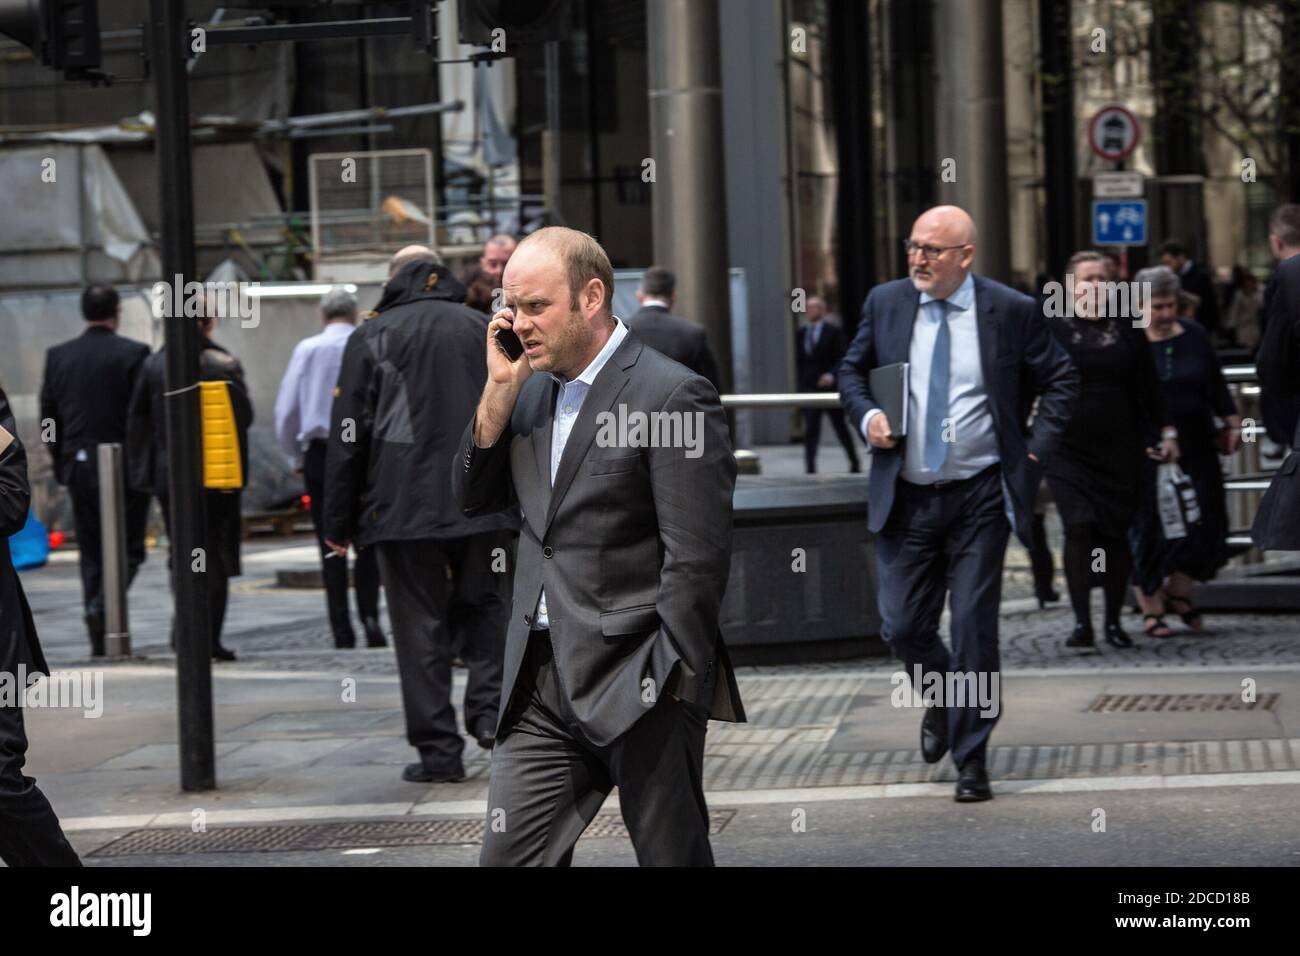 Great Britain / England /London /City of London / A City of London businessman speaking on his mobile phone. Stock Photo